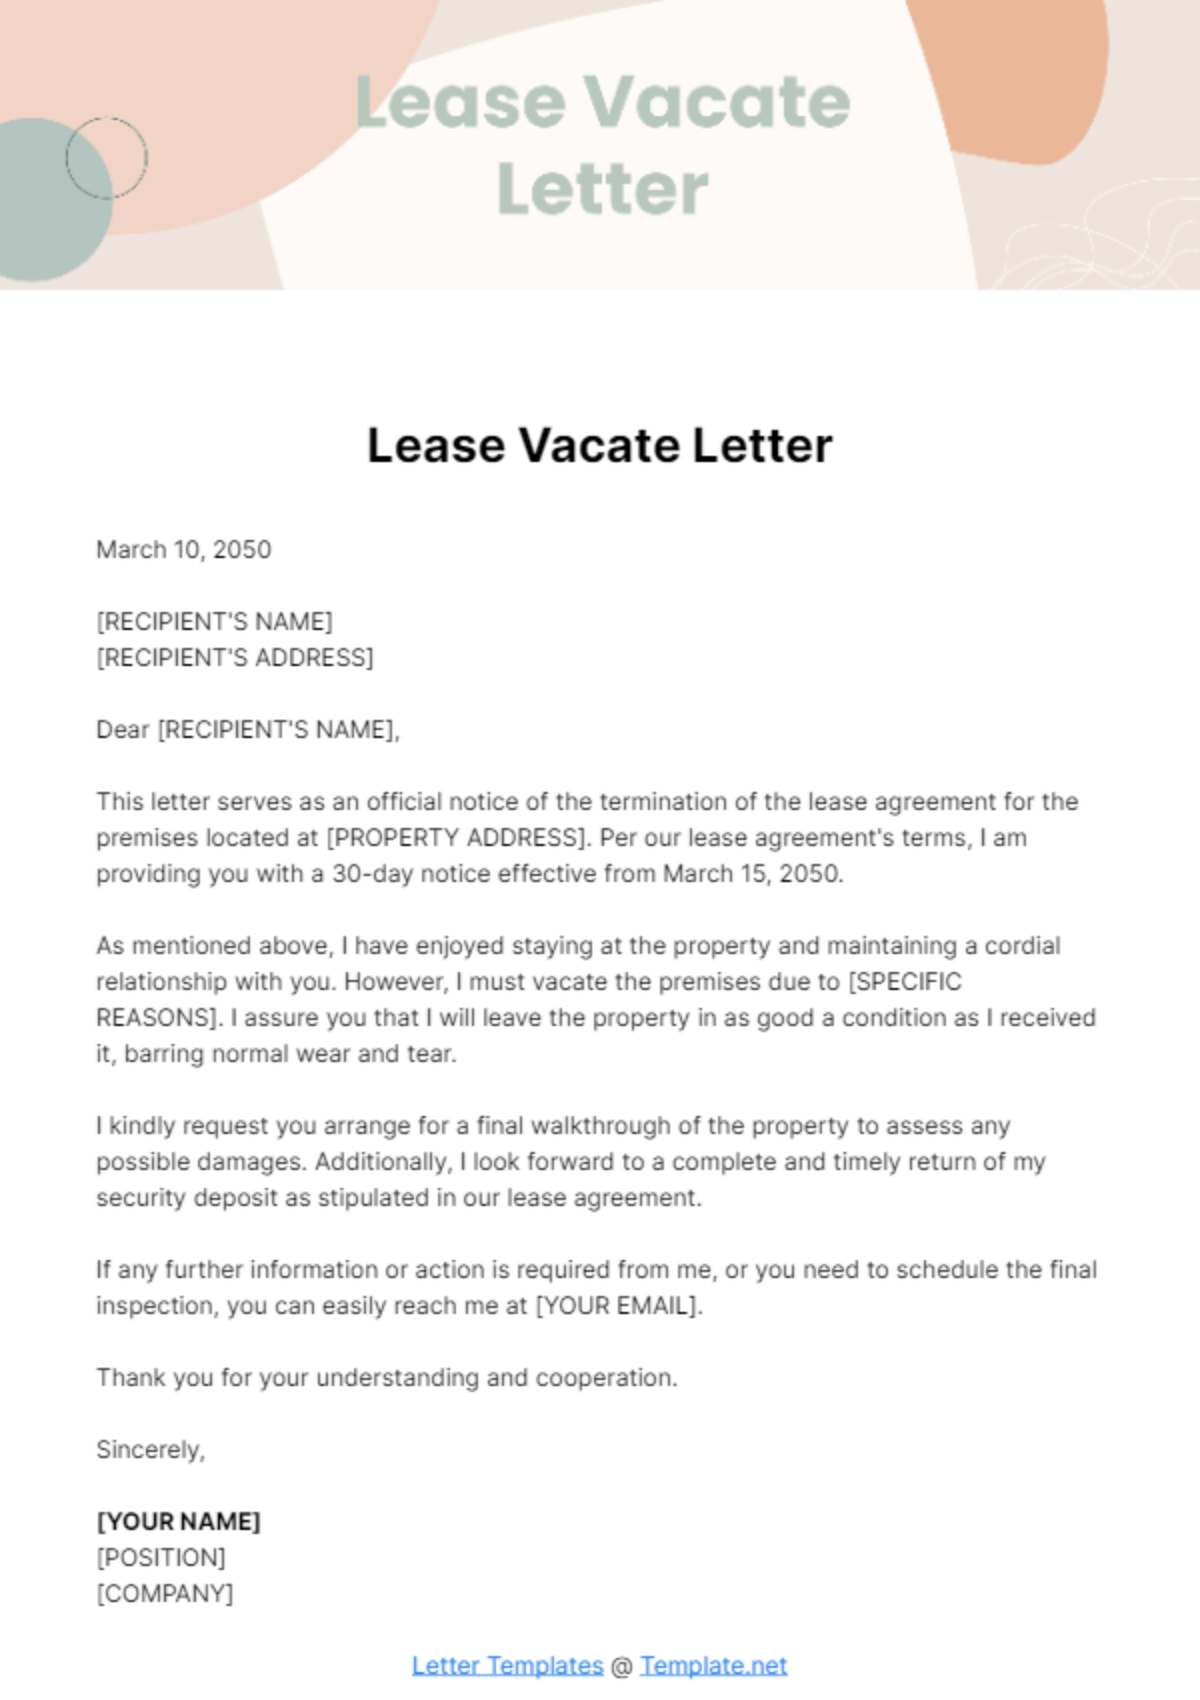 Free Lease Vacate Letter Template